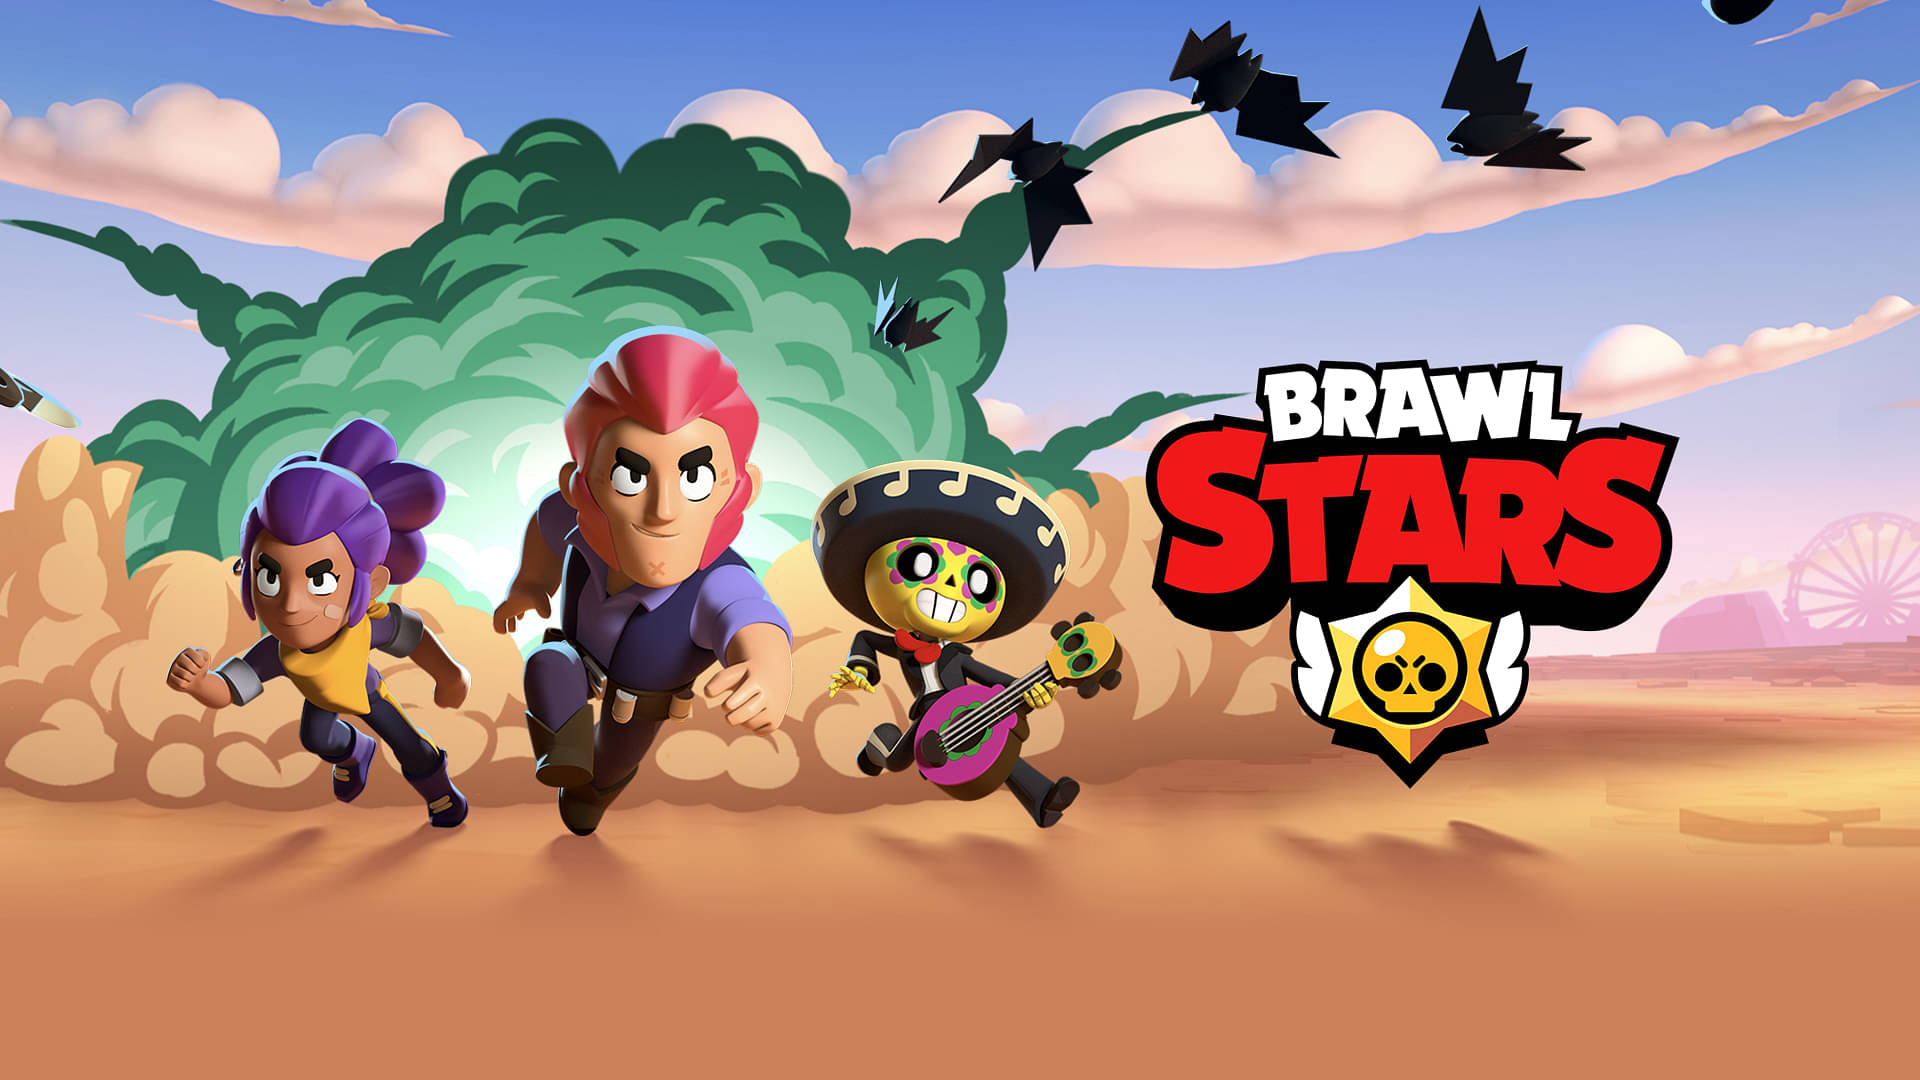 Brawl Stars How To Play Brawl Stars A Quick Guide For Beginners The Sportsrush - brawl stars animation unit images